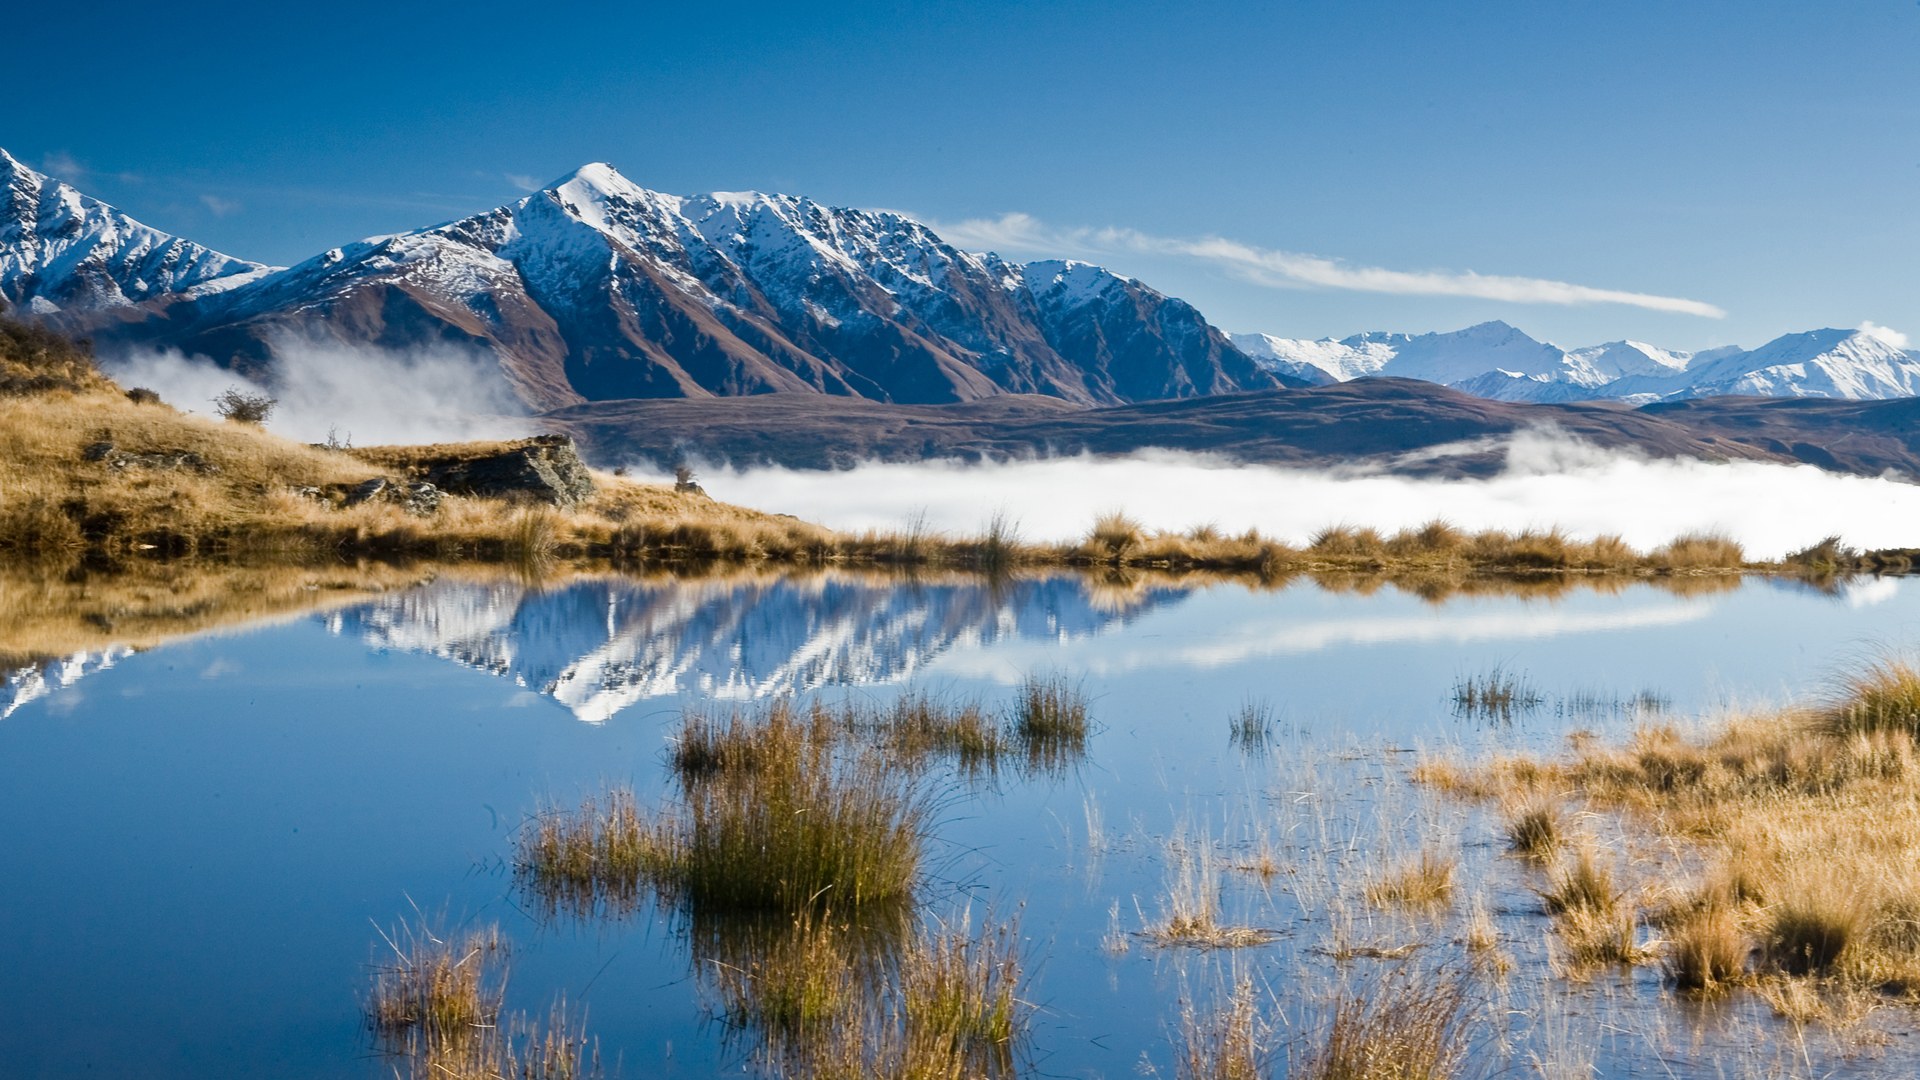 Mountains in New Zealand Wallpaper Free Wallpapers   High resolution